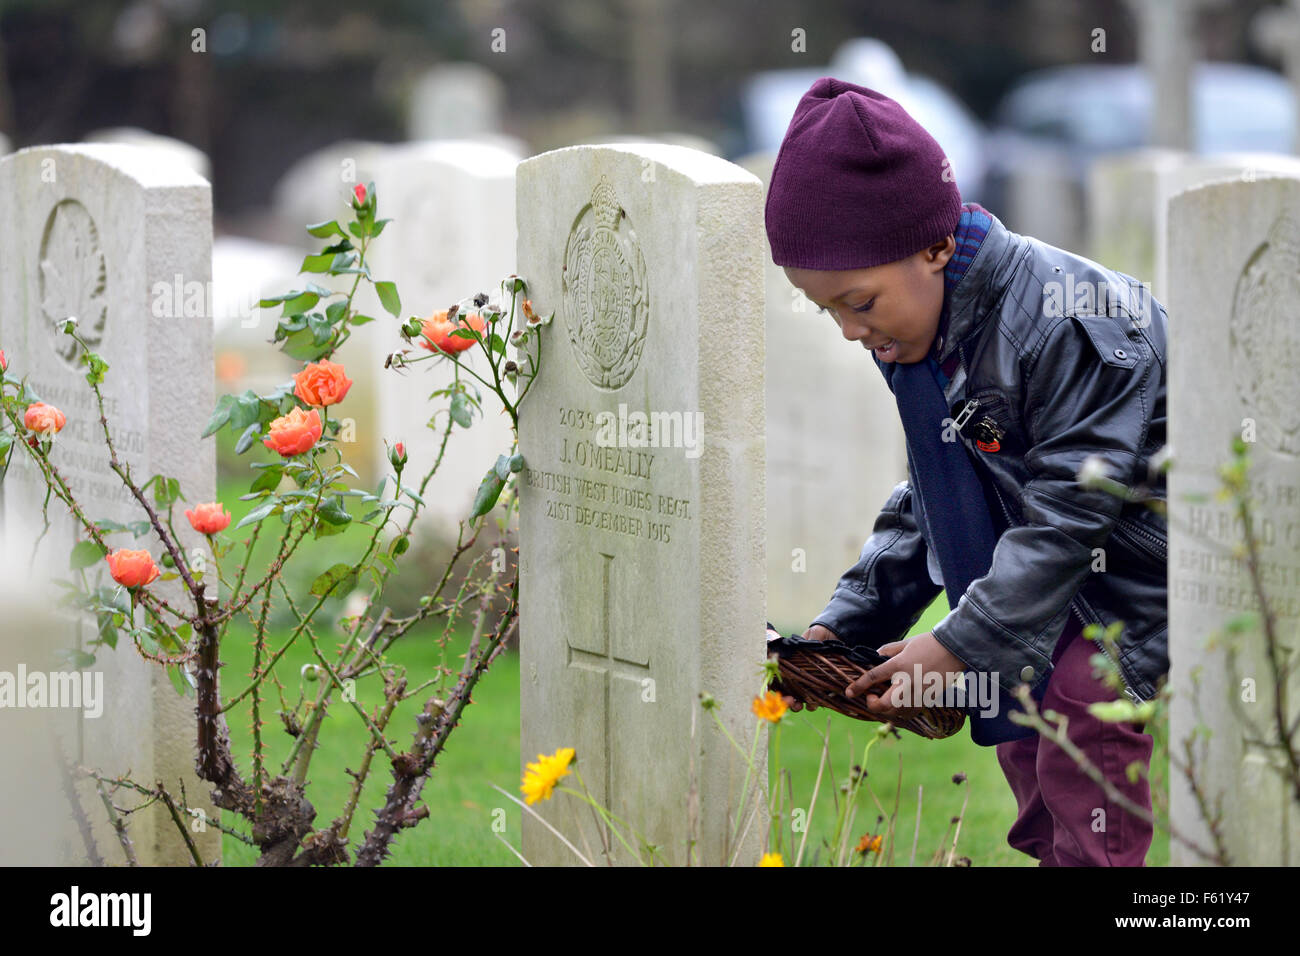 Seaford, UK. 10th Nov, 2015. Service and blue plaque unveling to commemorate the soldiers of the British West Indies Regiment, founded 100 years ago, that fought in the Great War. Family of the 19 soldiers that died in and were buried in Seaford Cemetery visited the graves and laid wreaths of black poppies.A Libation ceremony was carried out by professor Gus John, and a poem was read by poet Nairobi Thompson, before the blue plaque was unveiled. Peter Cripps/Alamy Live News Stock Photo